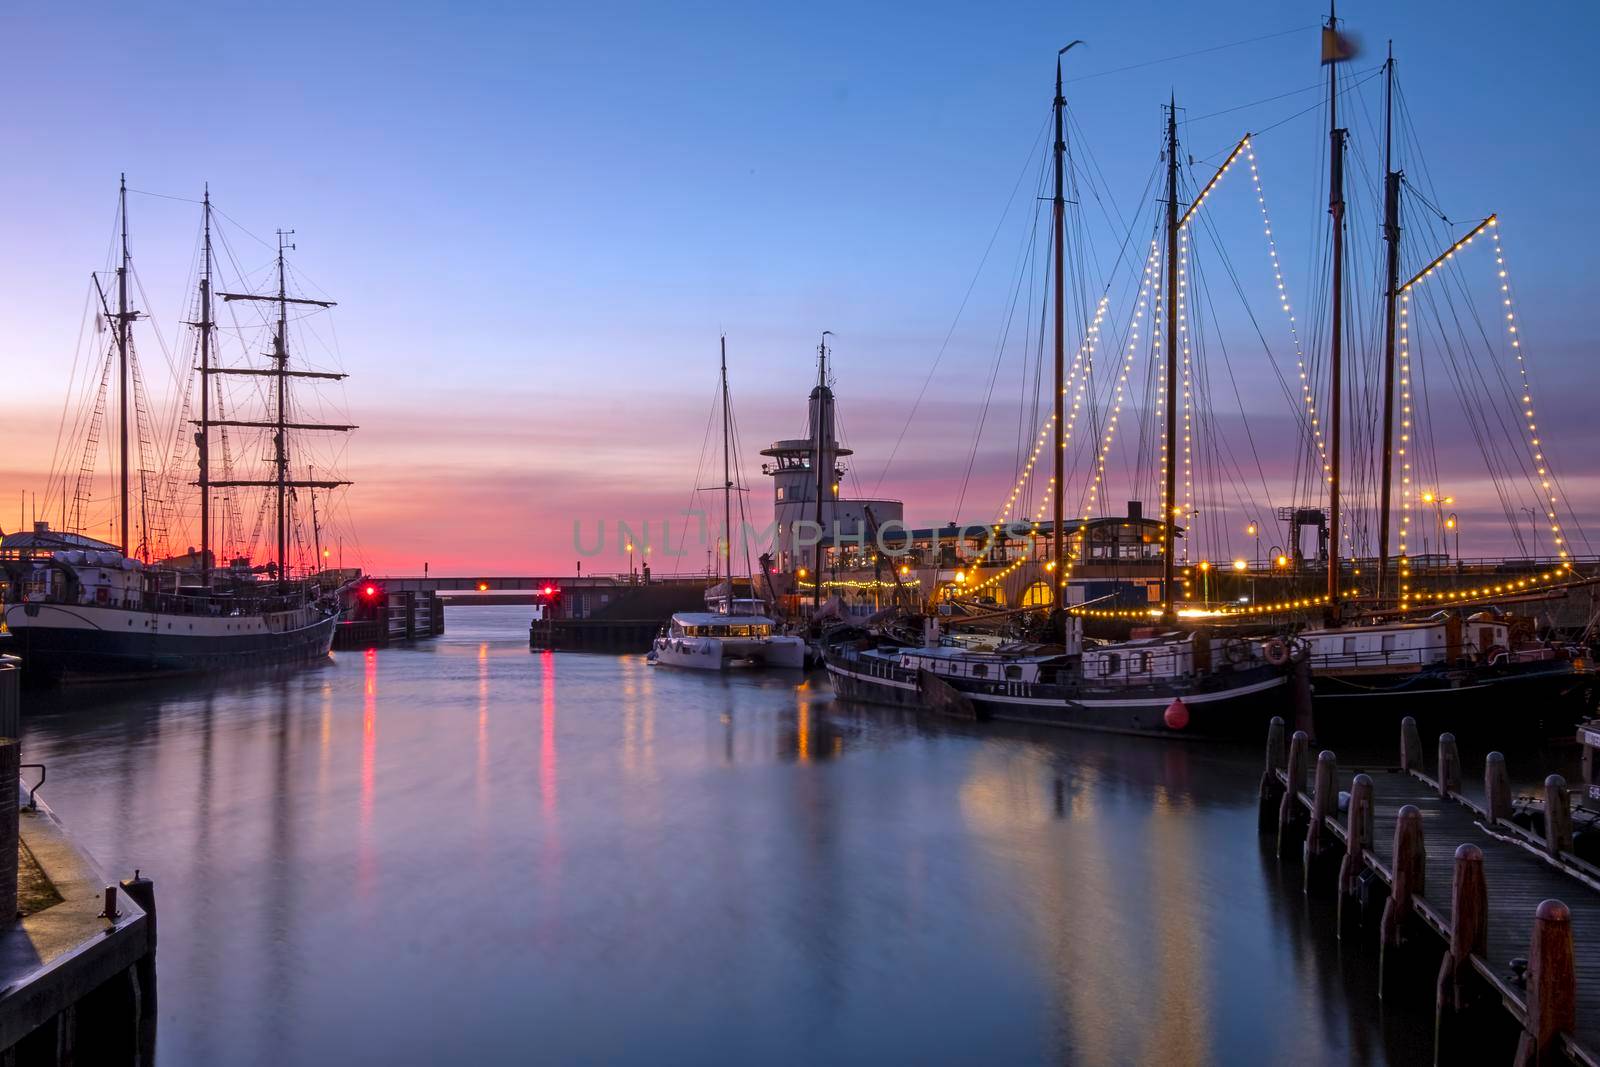 Harbor from Harlingen with decorated sailing boats in Friesland the Netherlands at sunset by devy